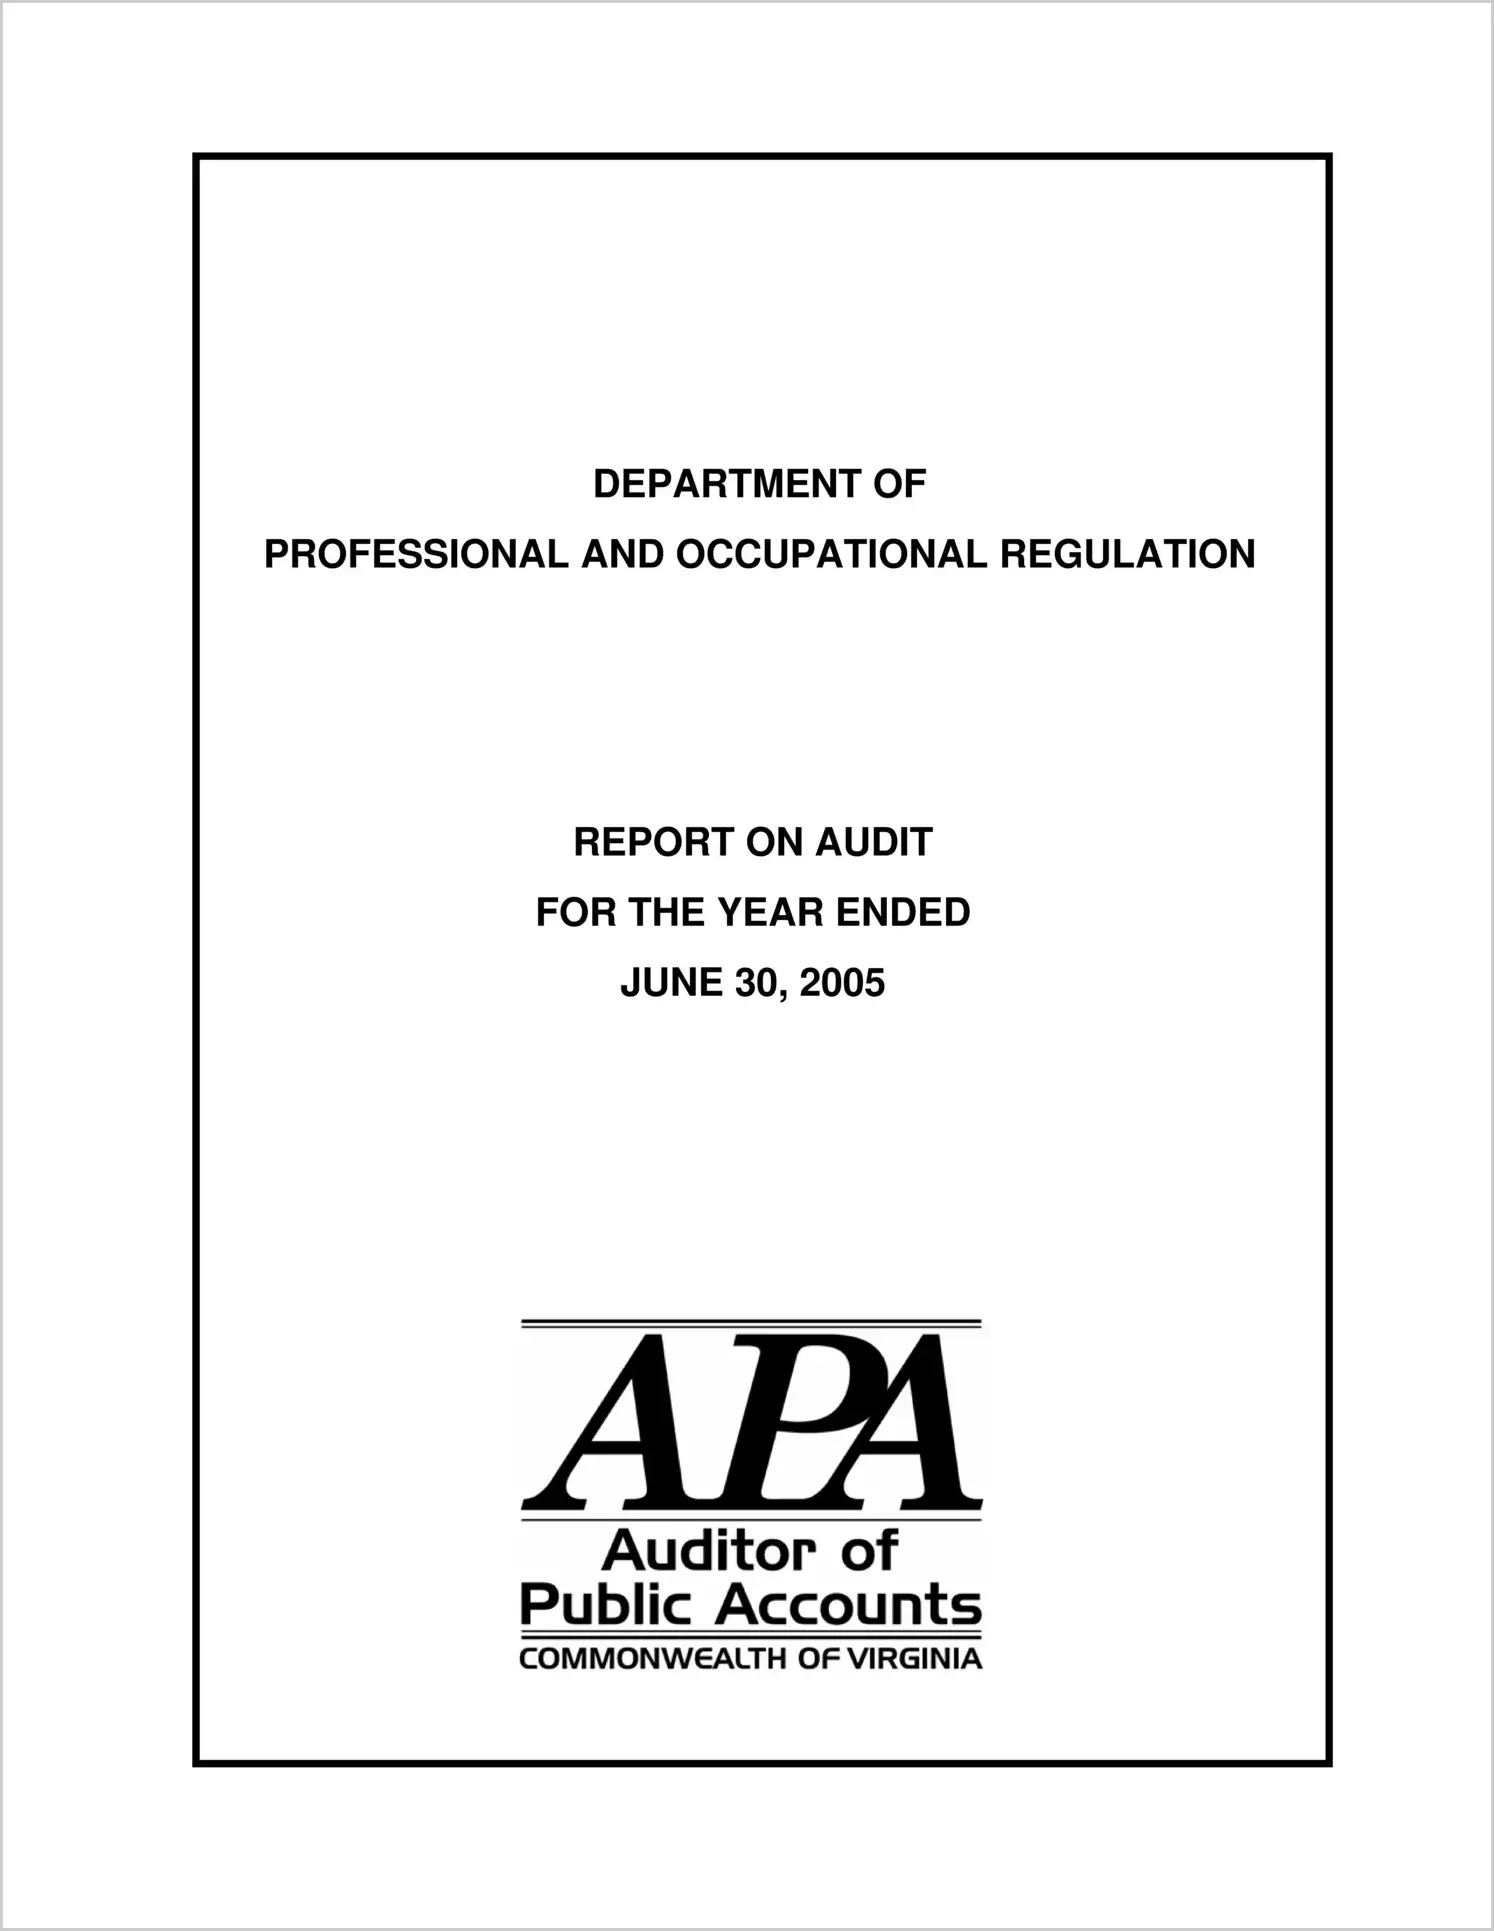 Department of Professional and Occupational Regulation for for the year ended June 30, 2005